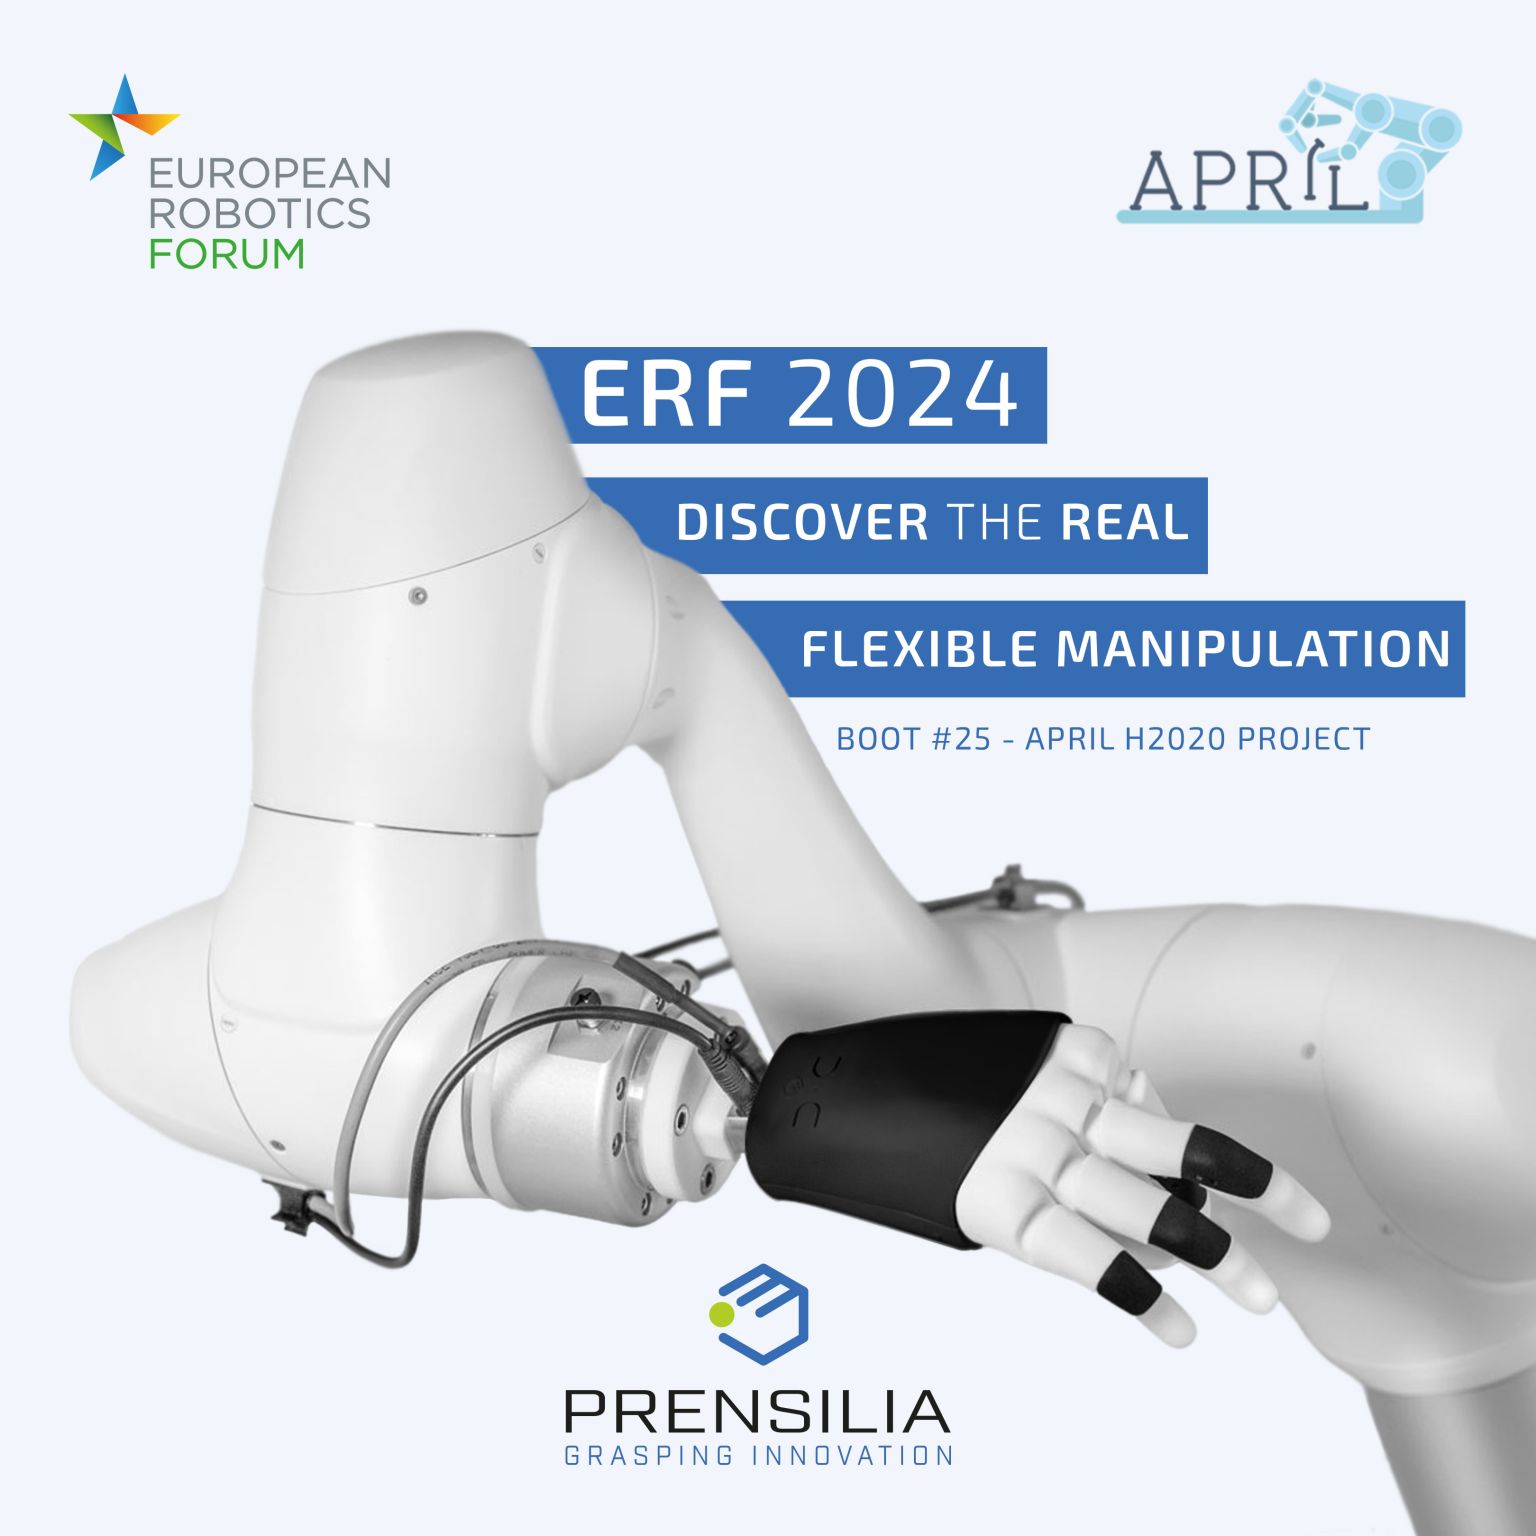 Poster of ERF 2024 with Mia Hand from Prensilia at the center of the image